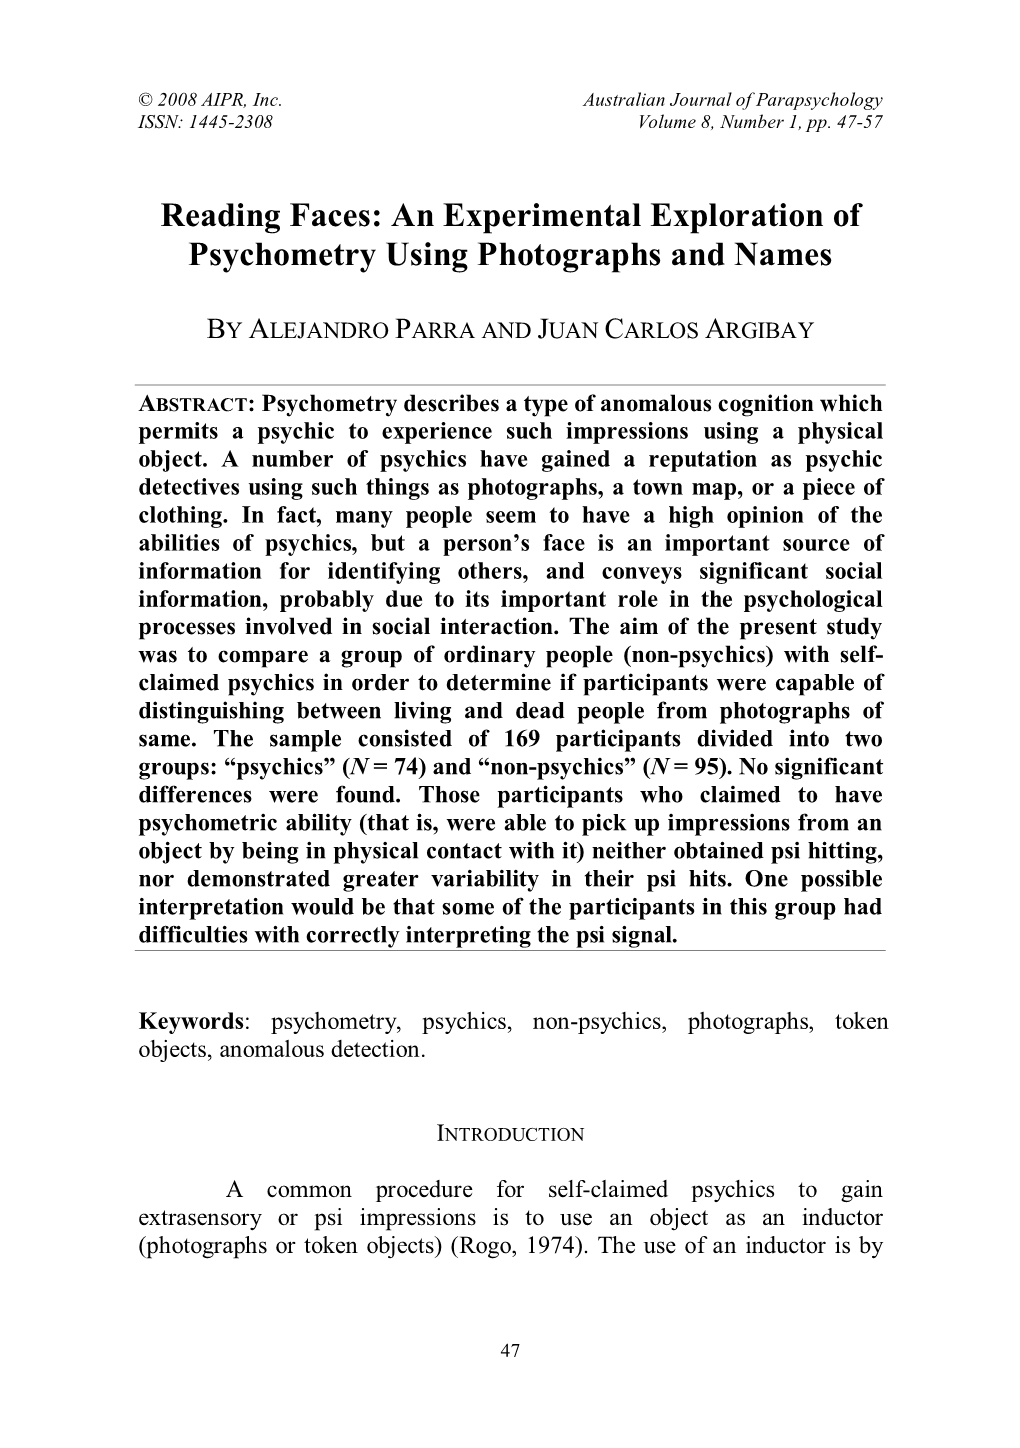 Reading Faces: an Experimental Exploration of Psychometry Using Photographs and Names